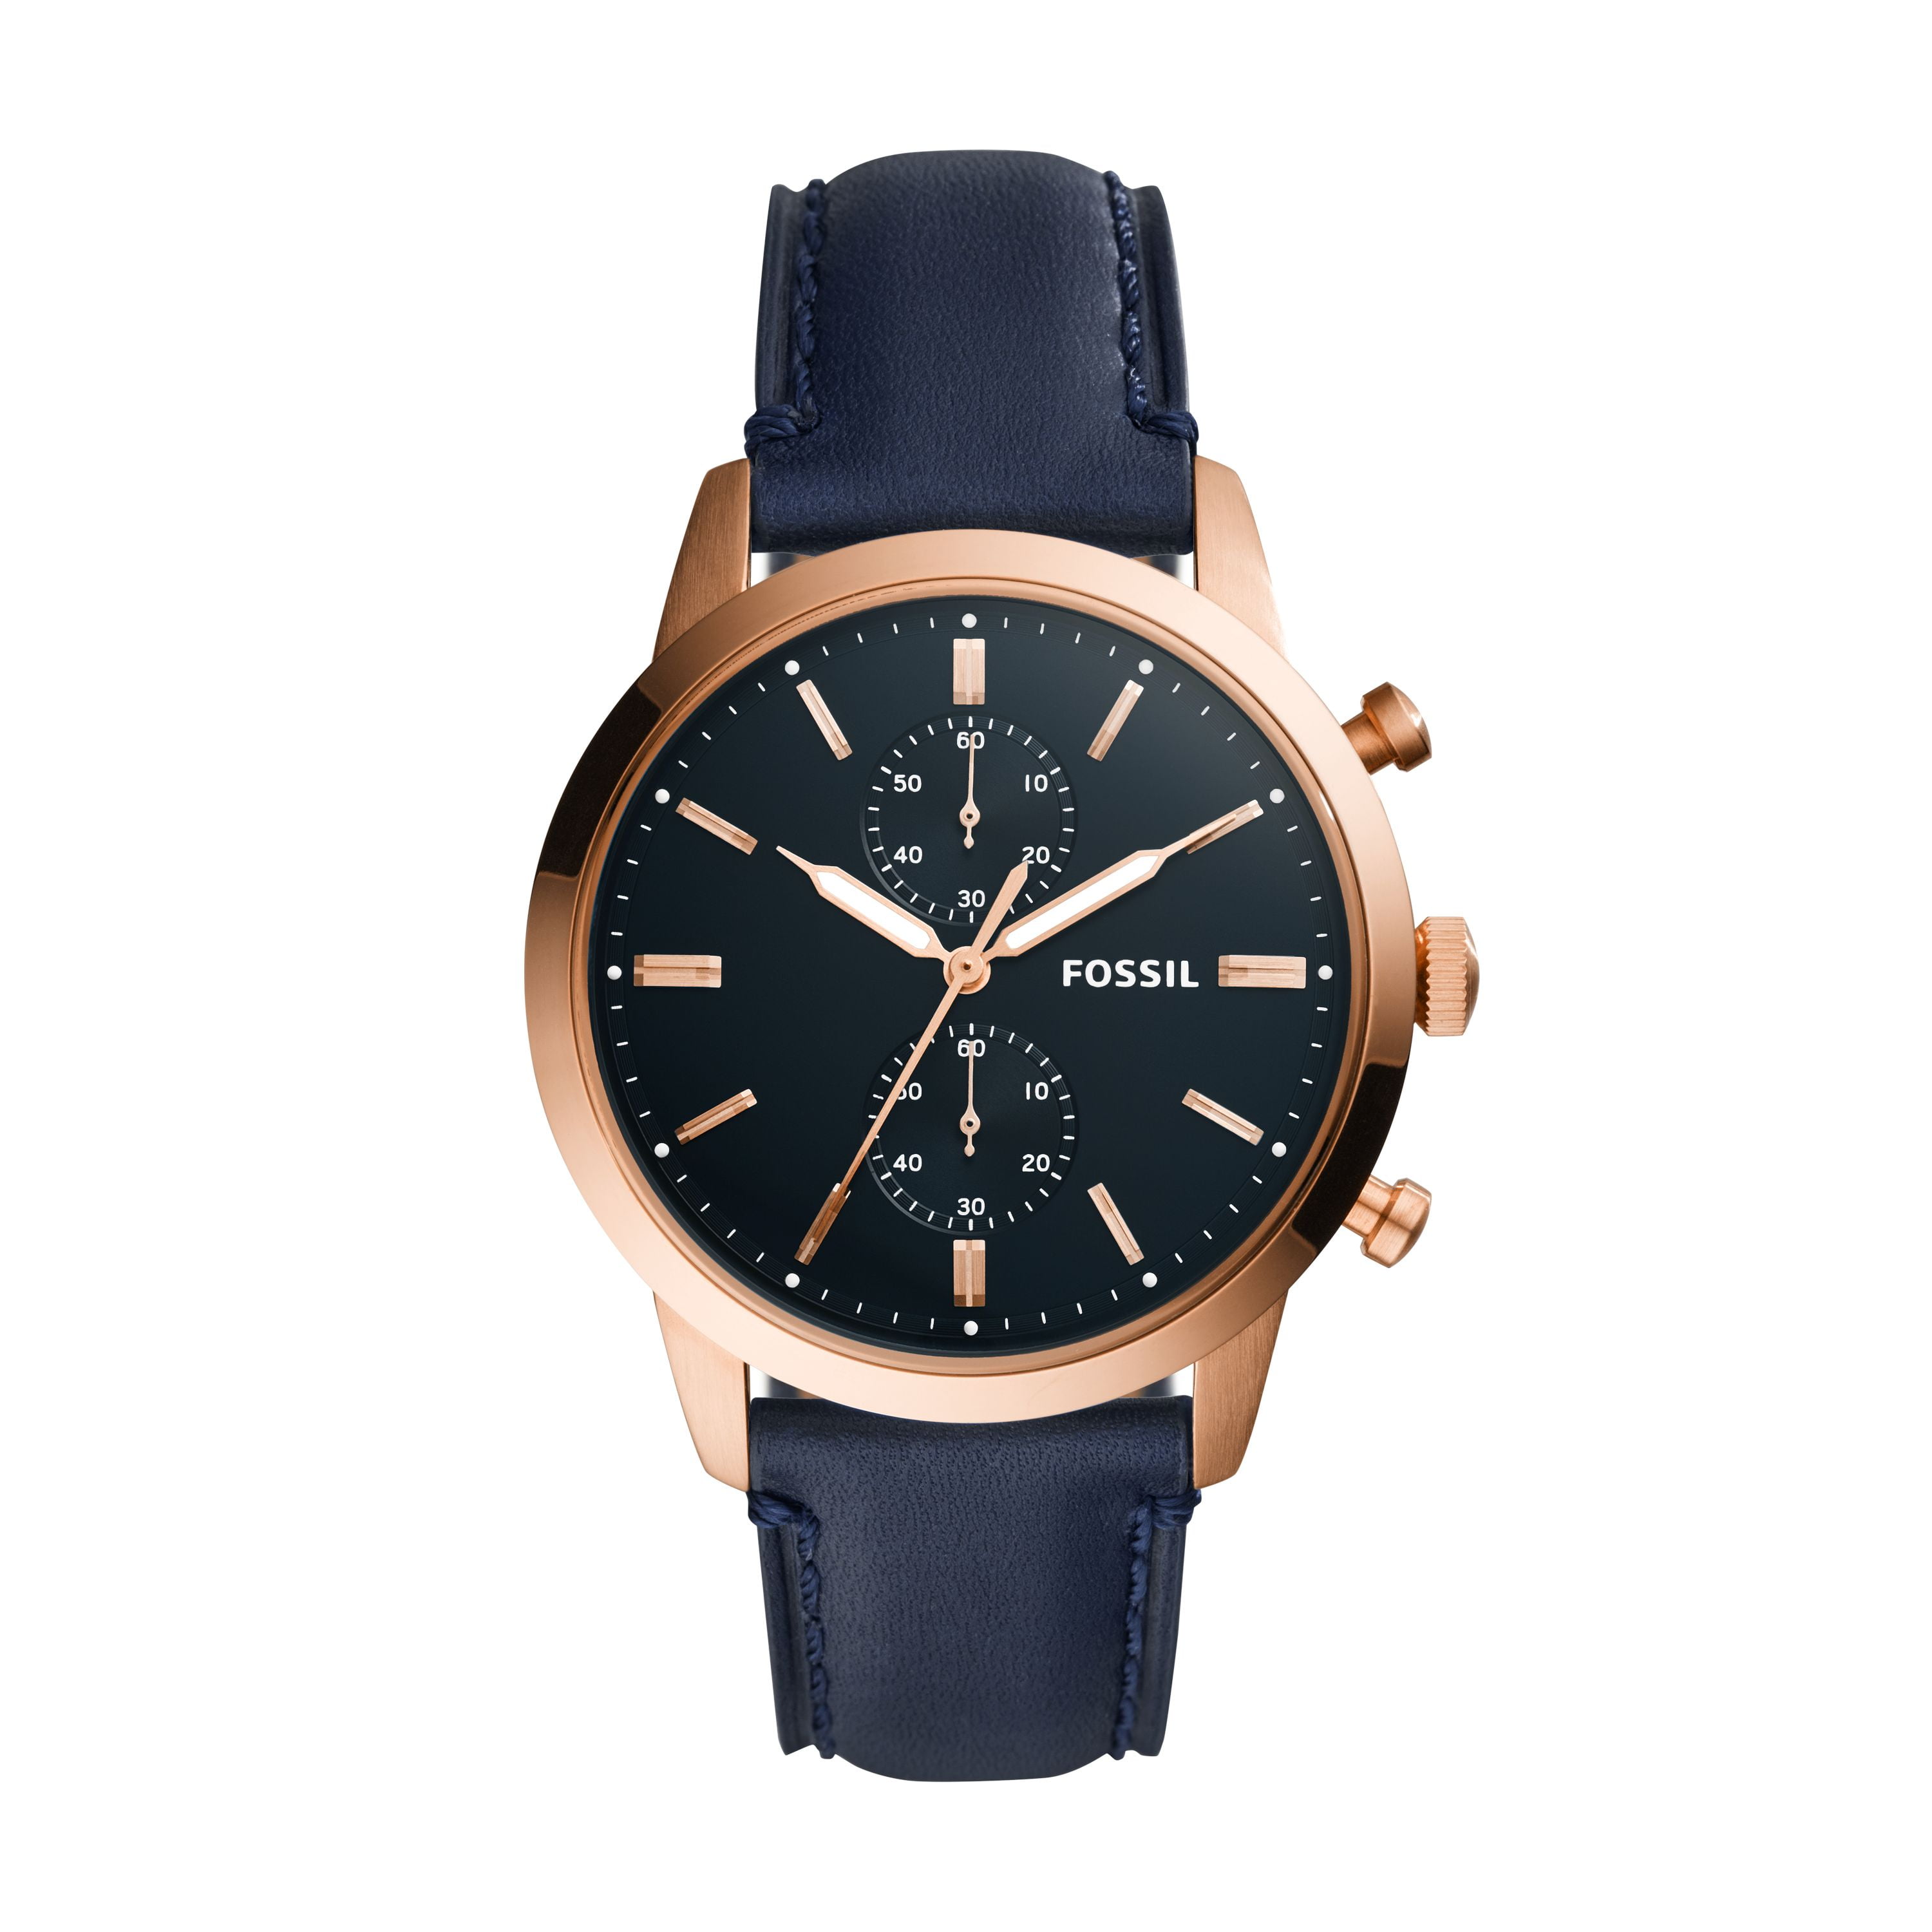 Fossil Men's Townsman Chronograph Navy Leather Watch 44mm, FS5436 ...